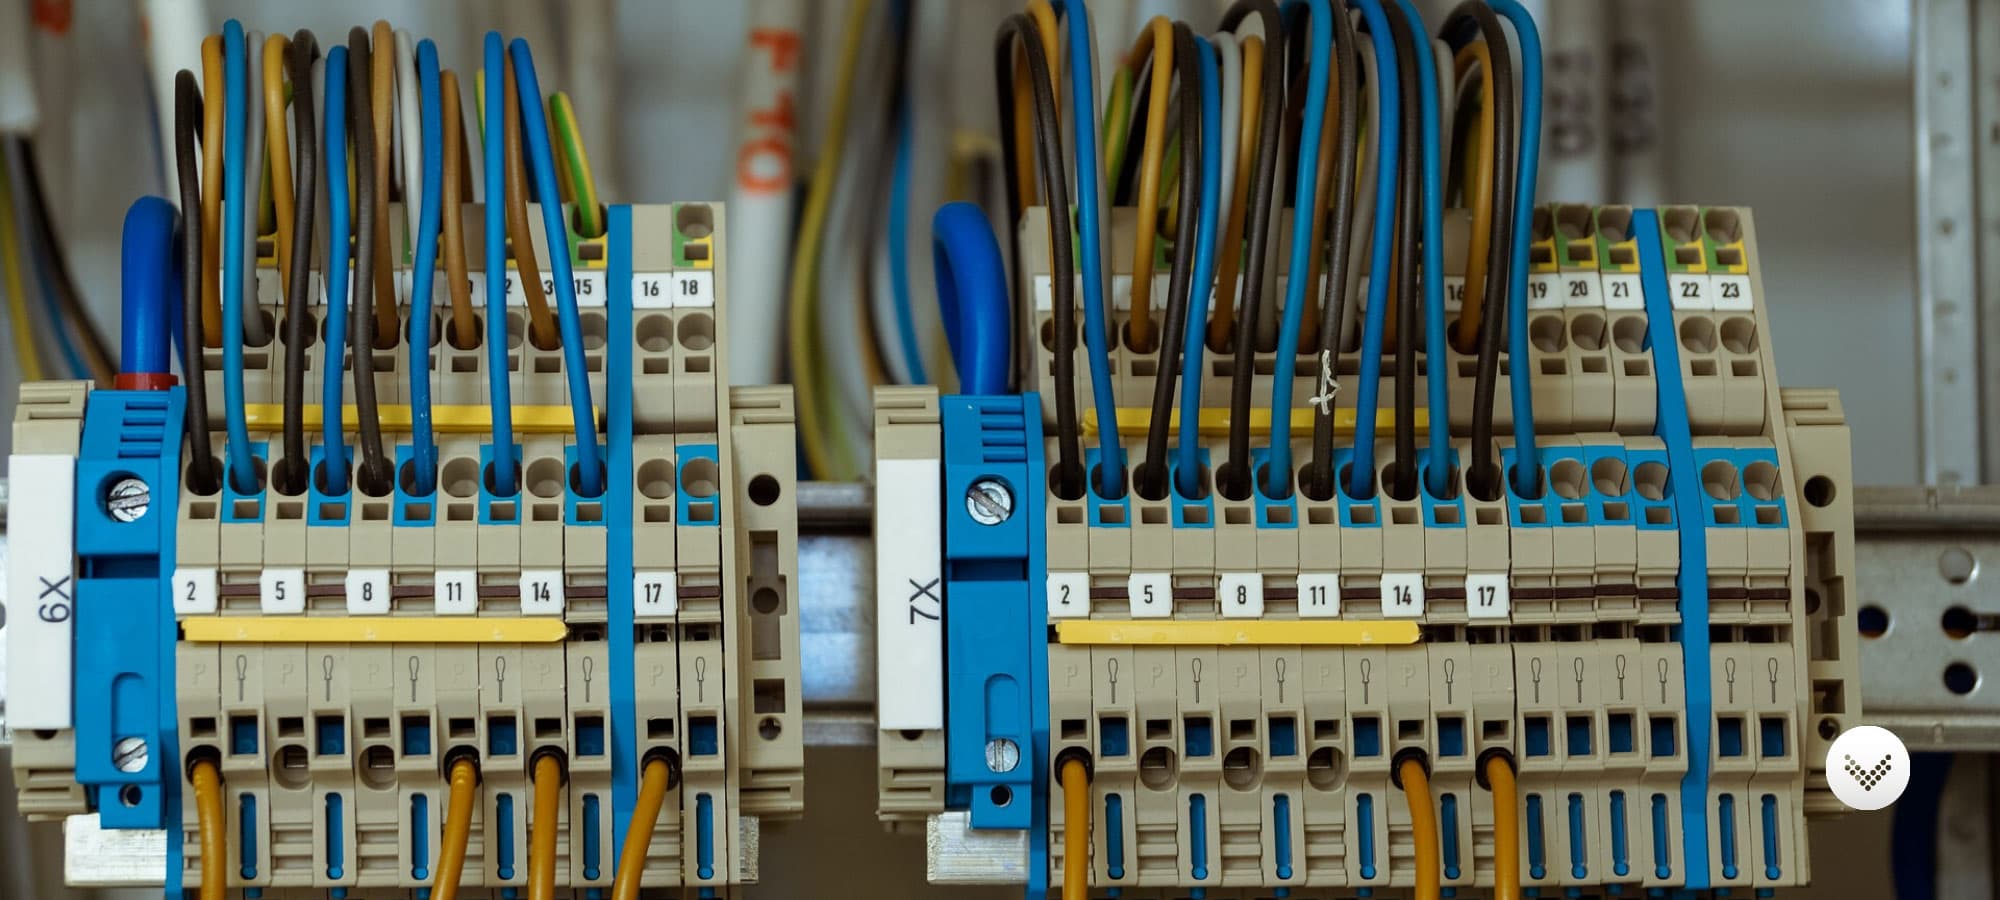 Electrical finger safe fuse boxes with several wires connected and running through.